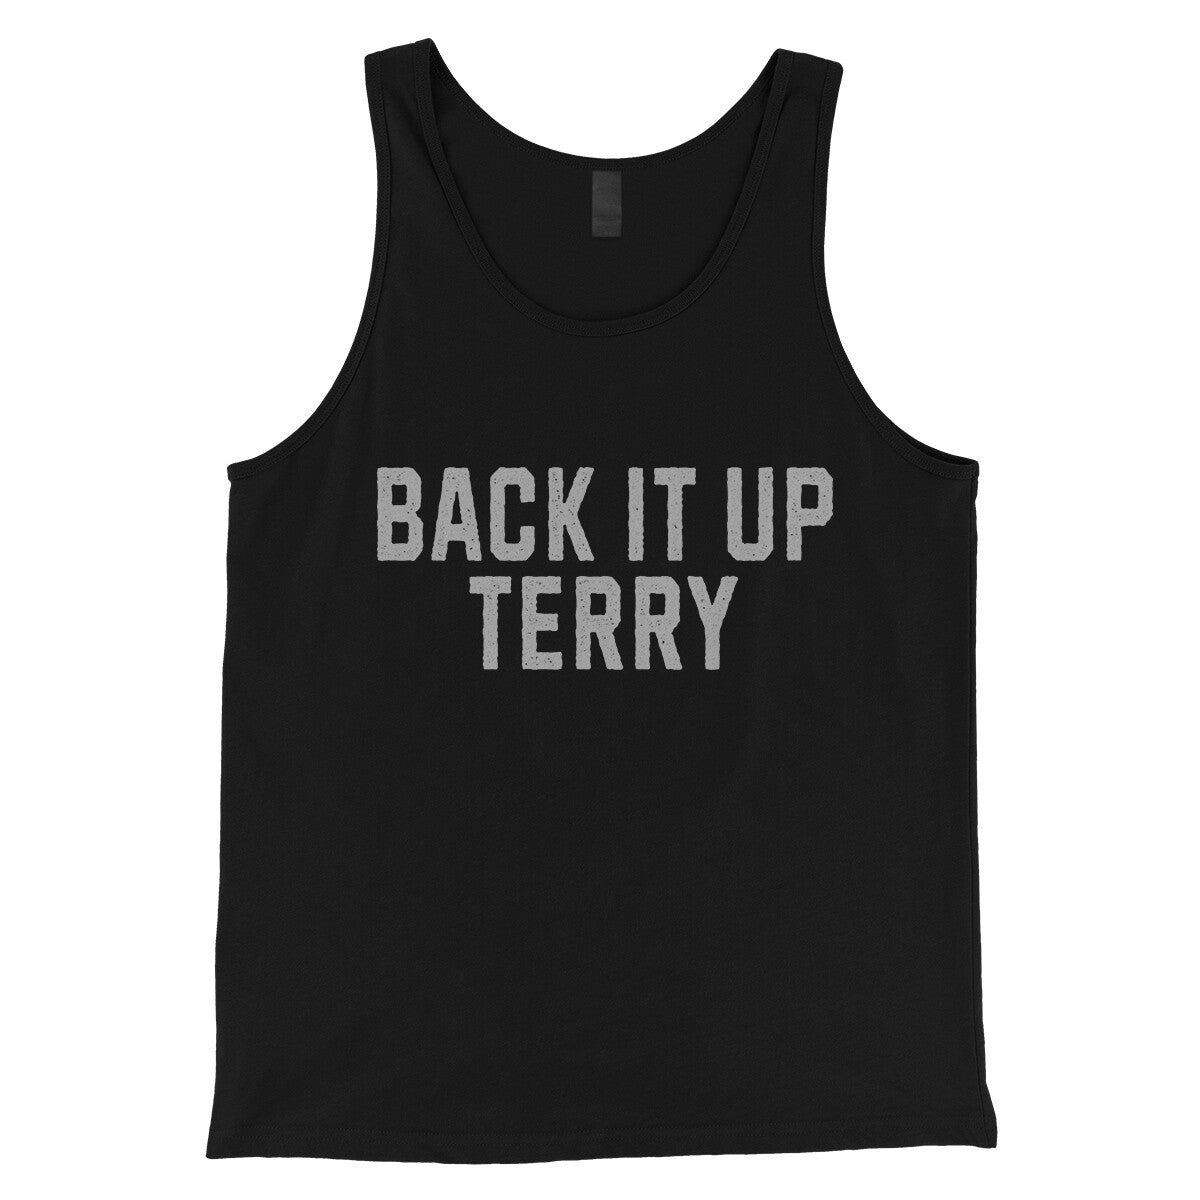 Back it up Terry in Black Color